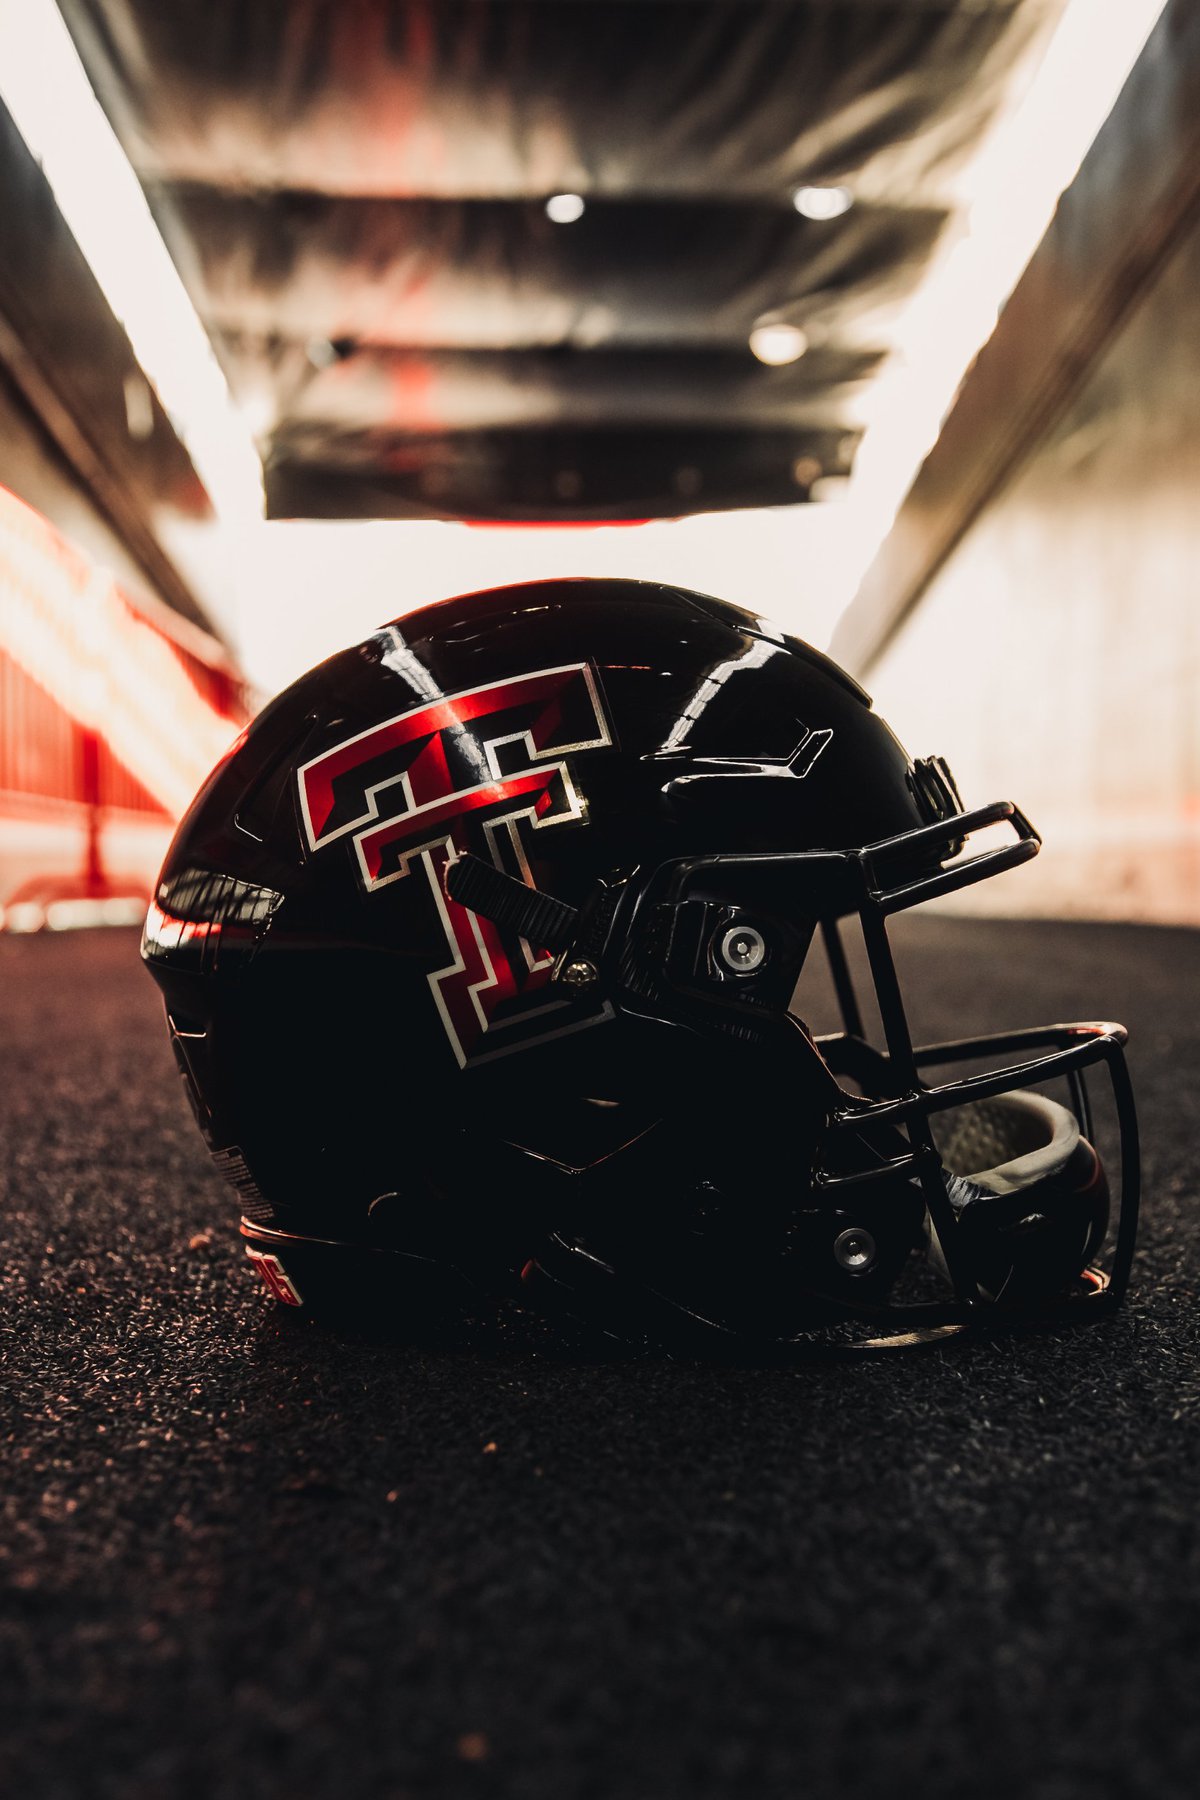 Texas Tech Athletics makes changes for game days